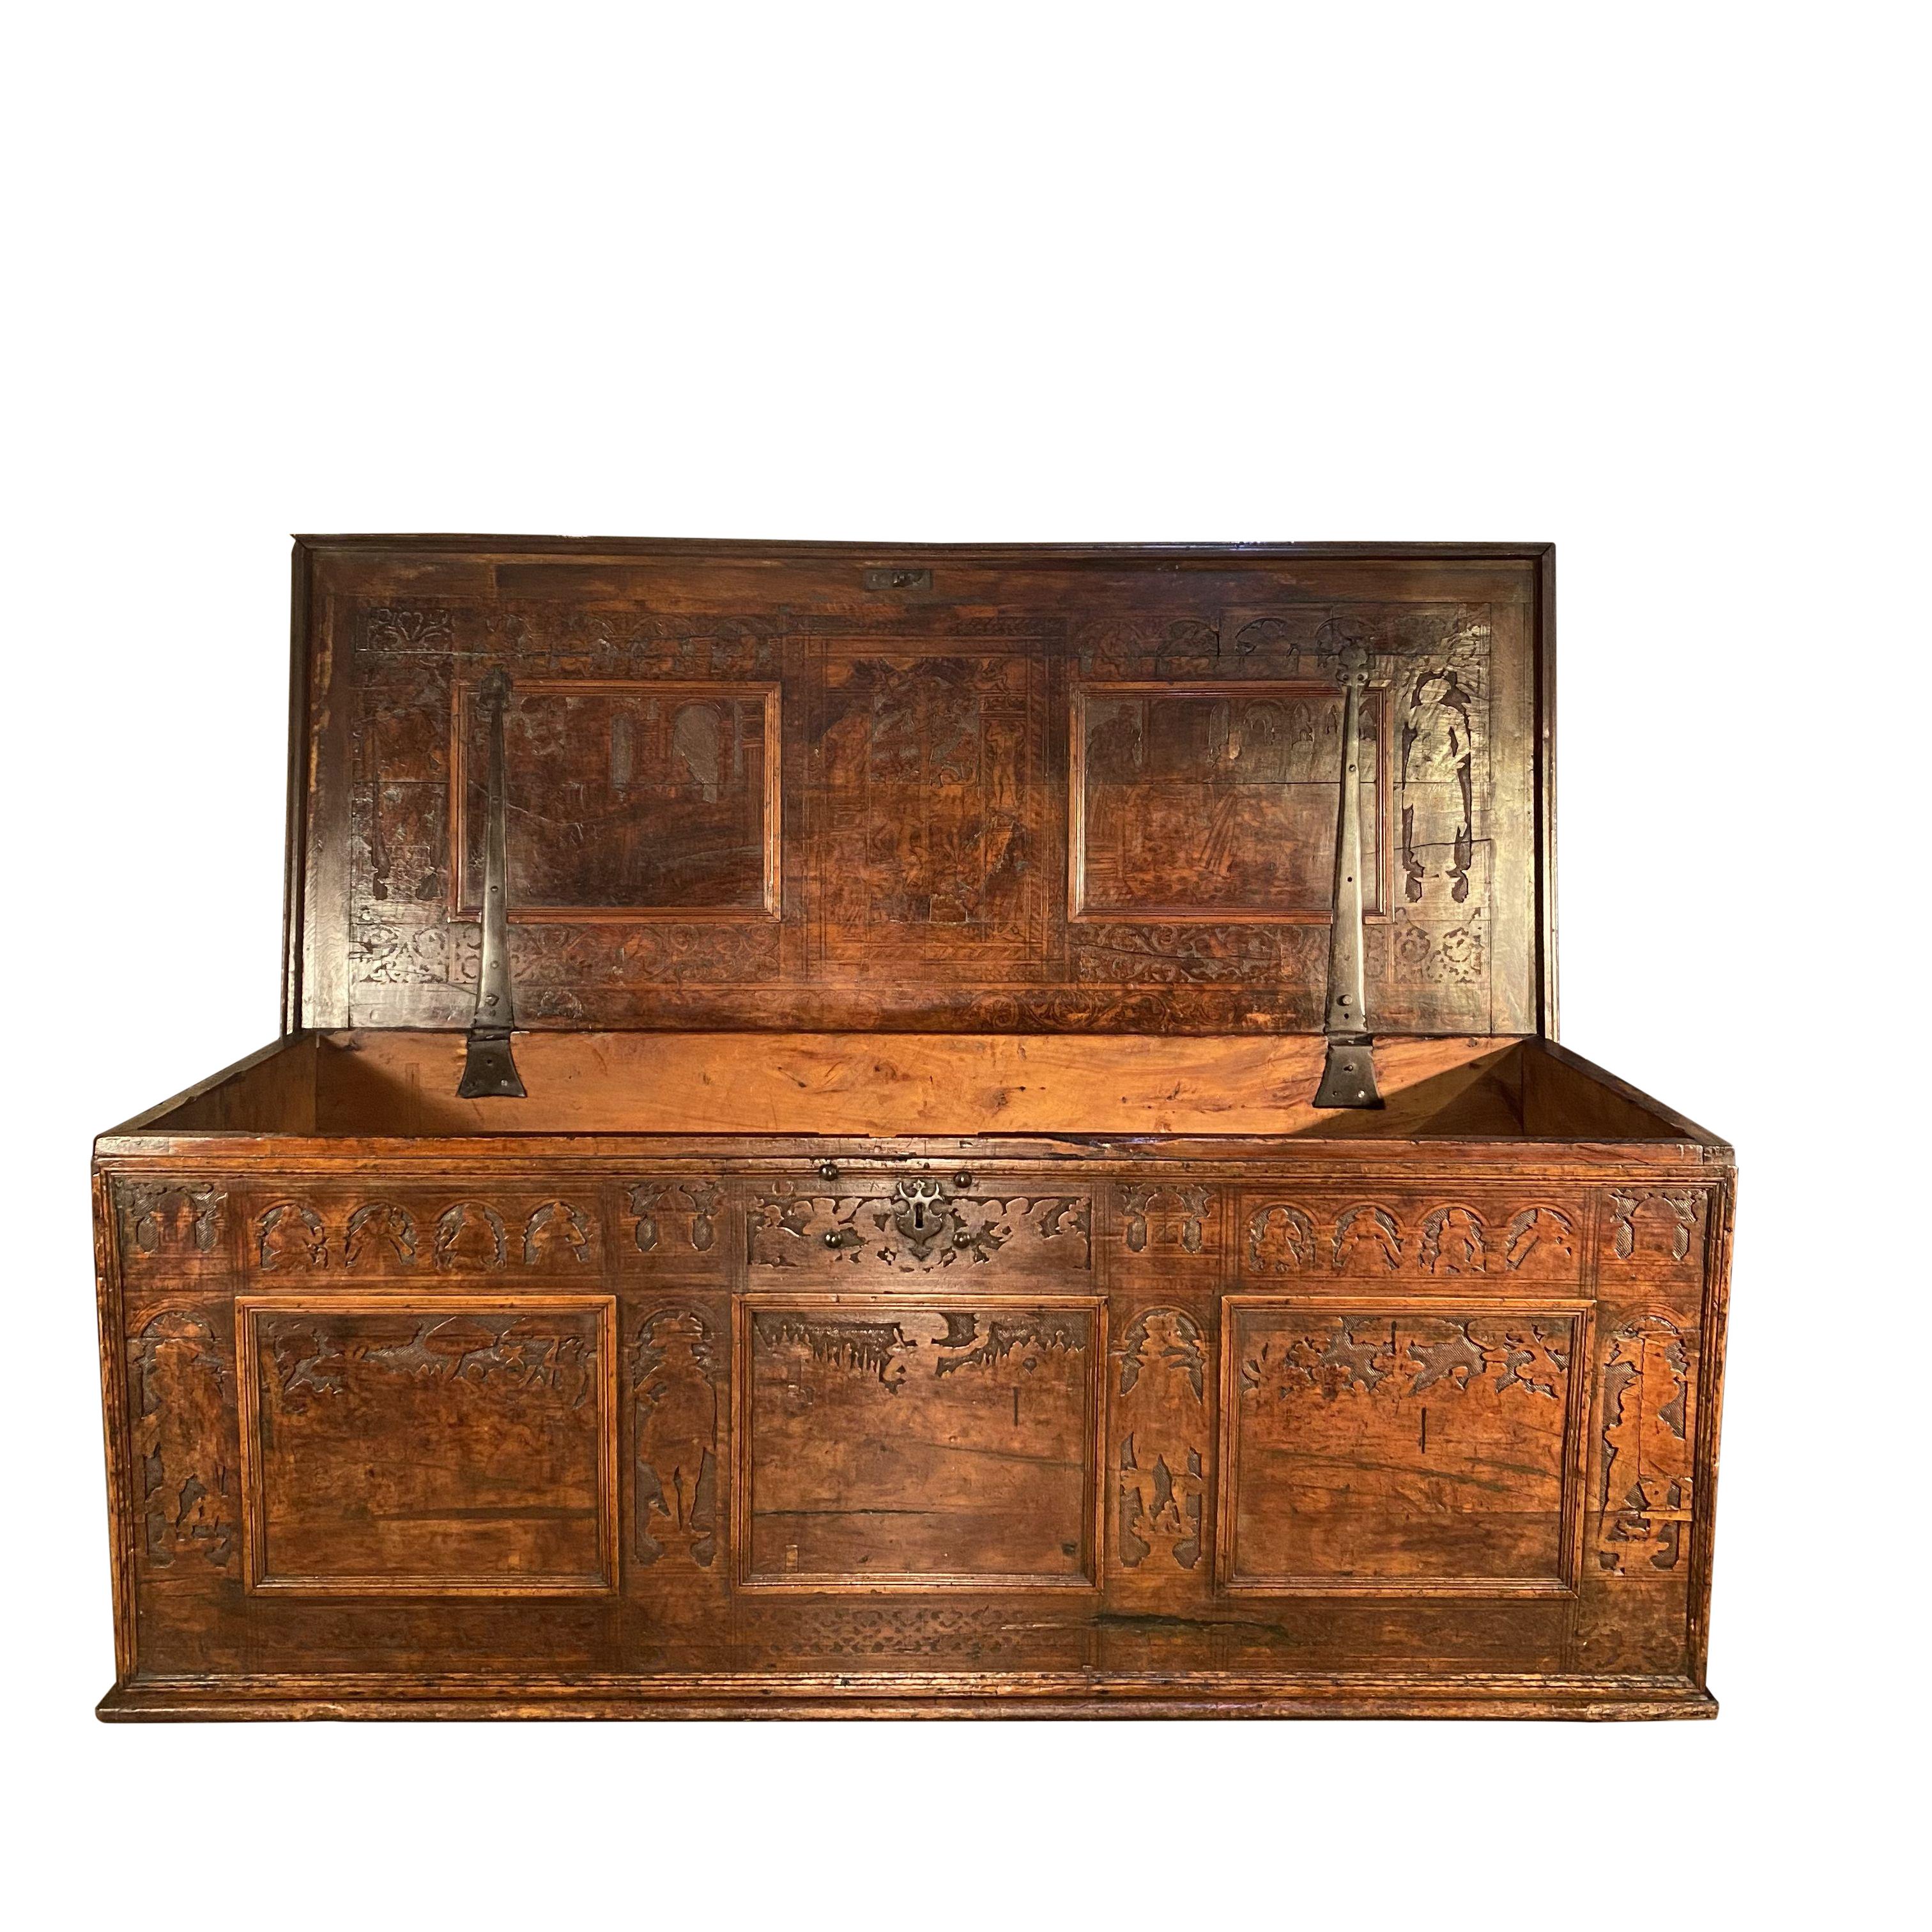 Late 16th century Venetian cedar wood cassone wedding chest featuring finely detailed carving in the champleve decorative style on both the front face and lid interior. 

Measures: 77